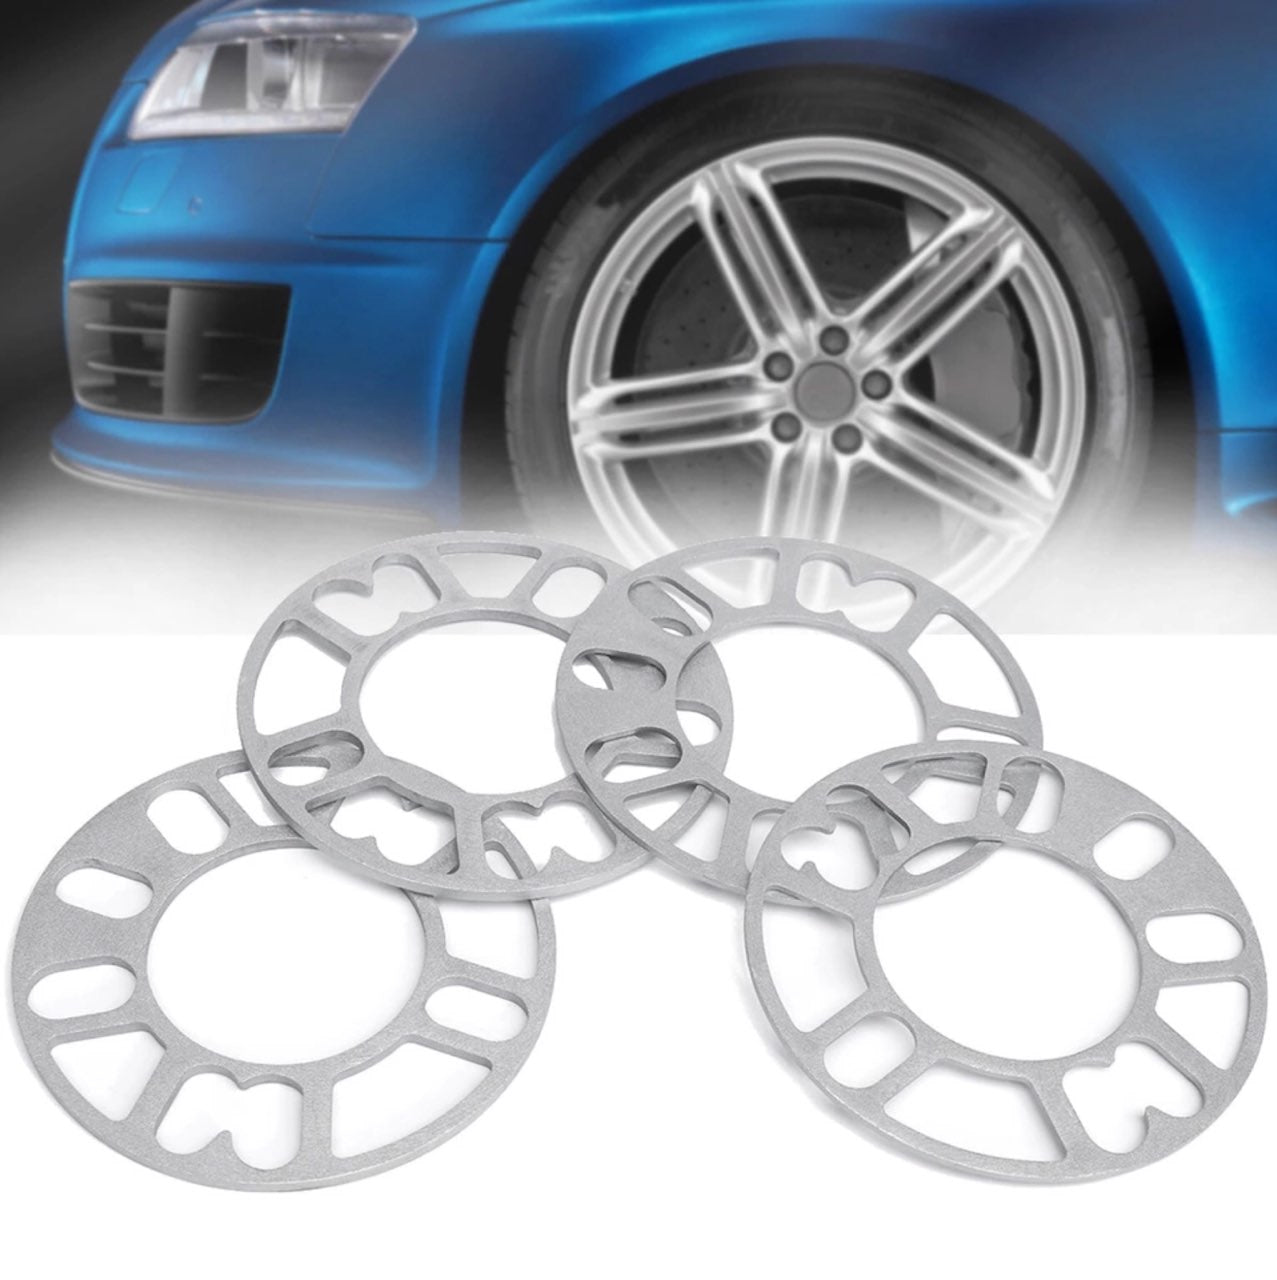 **SPECIAL** 4pcs Car Kit Universal Alloy Wheel Spacers 8mm